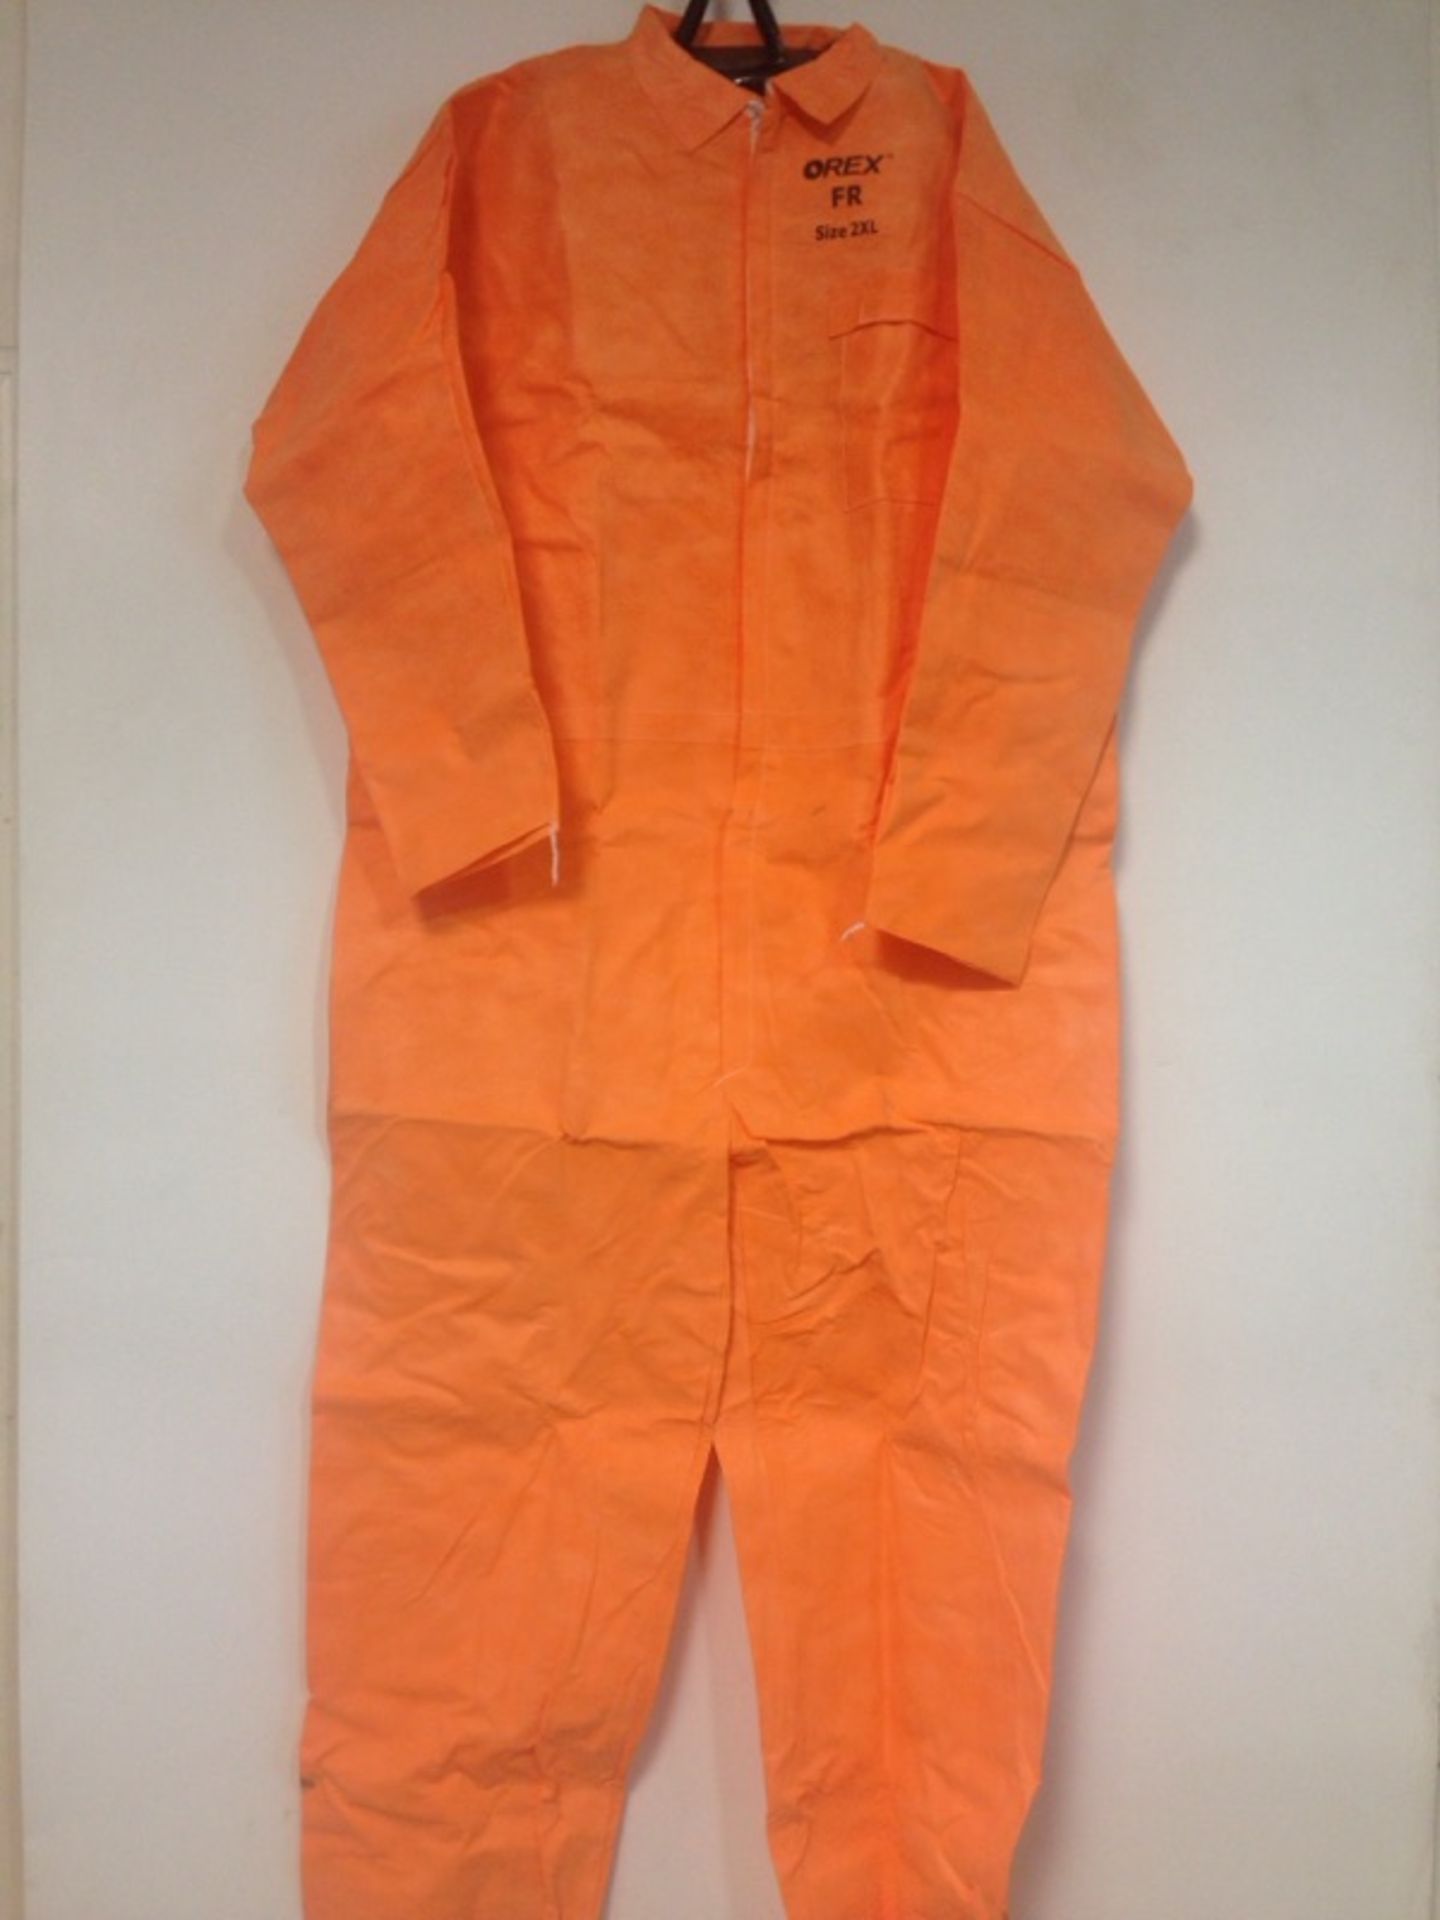 PALLET OF OREX ADVANCED PROTECTIVE CLOTHING - Image 3 of 3